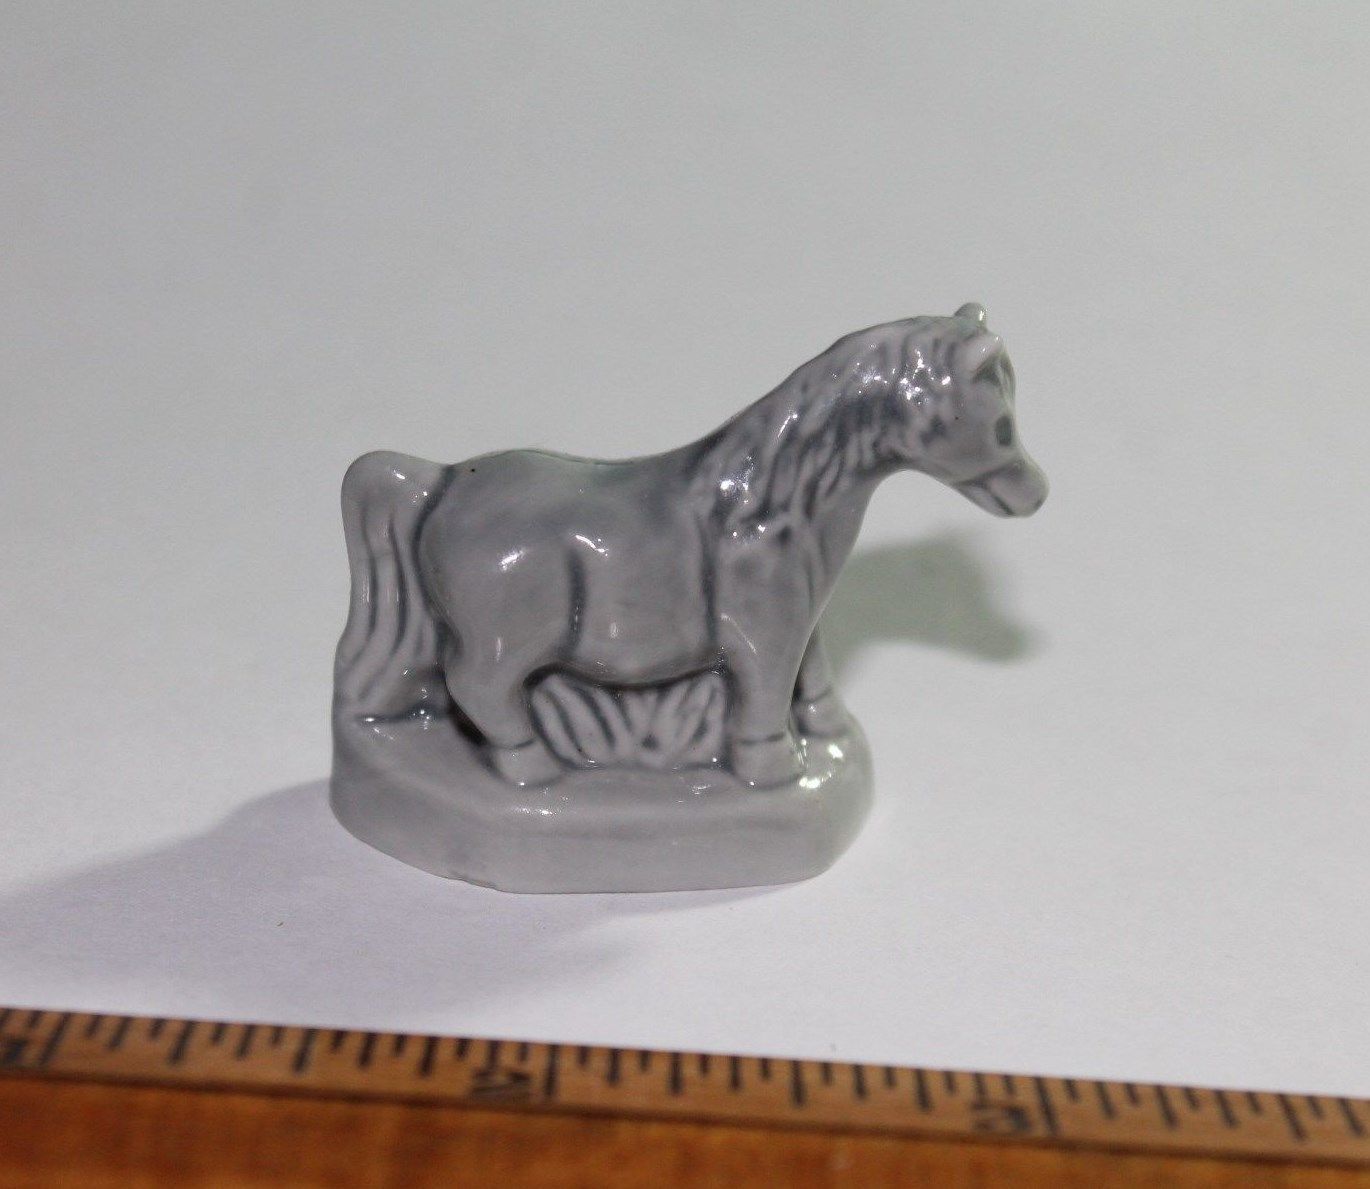 Wade Pony Red Rose Tea Figurine Pet Shop Series 2006-2008 - Made in England - $4.00